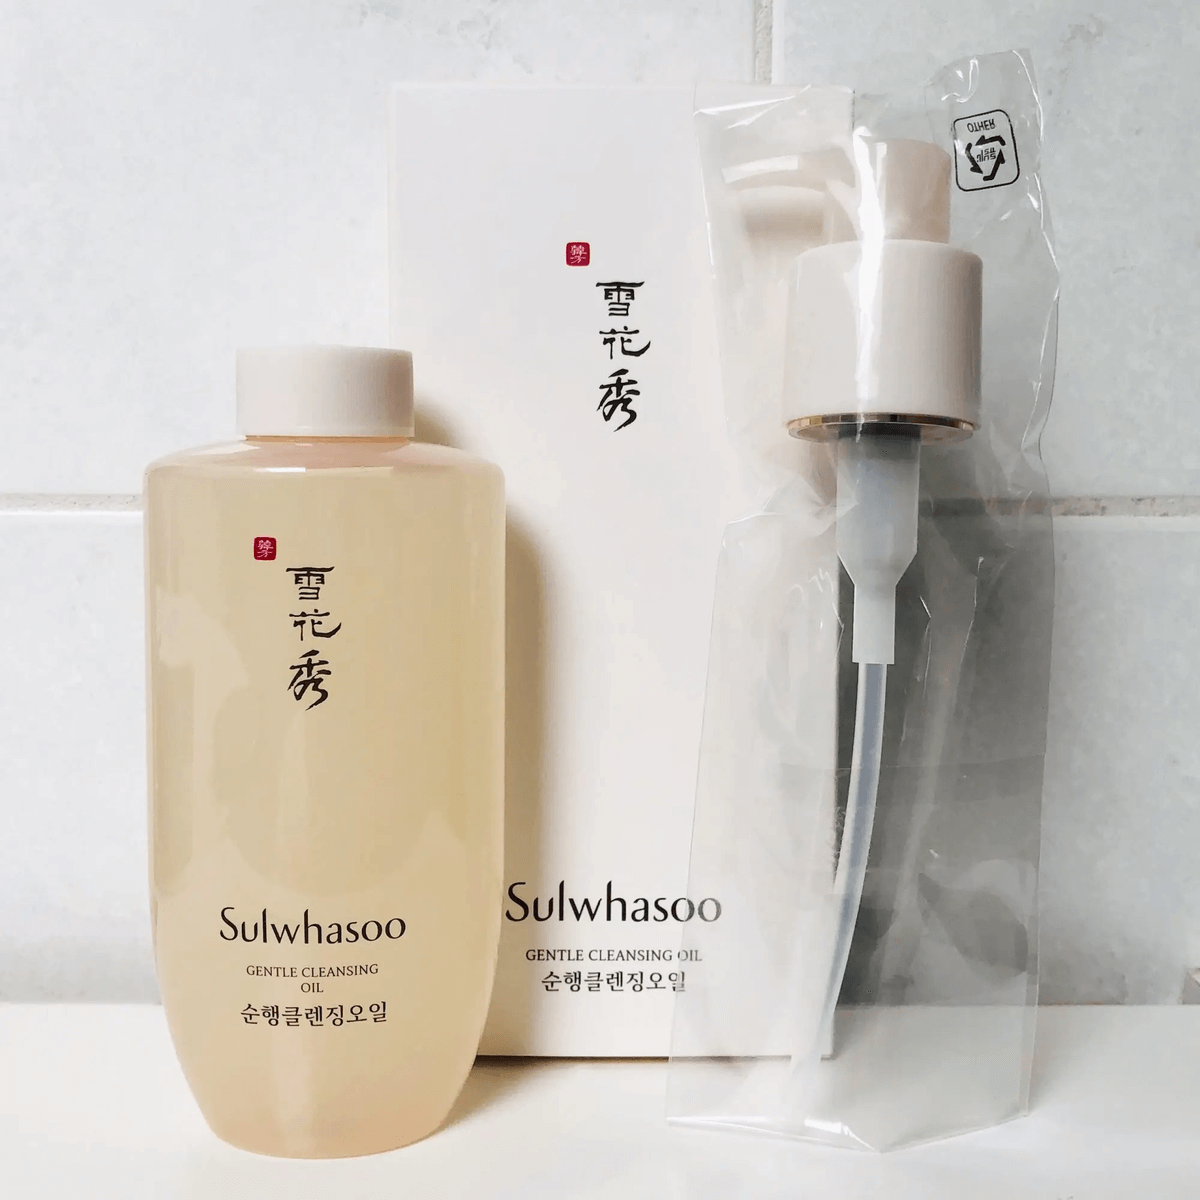 Gentle Cleansing Oil Huile Nettoyante Douceur [Sulwhasoo]